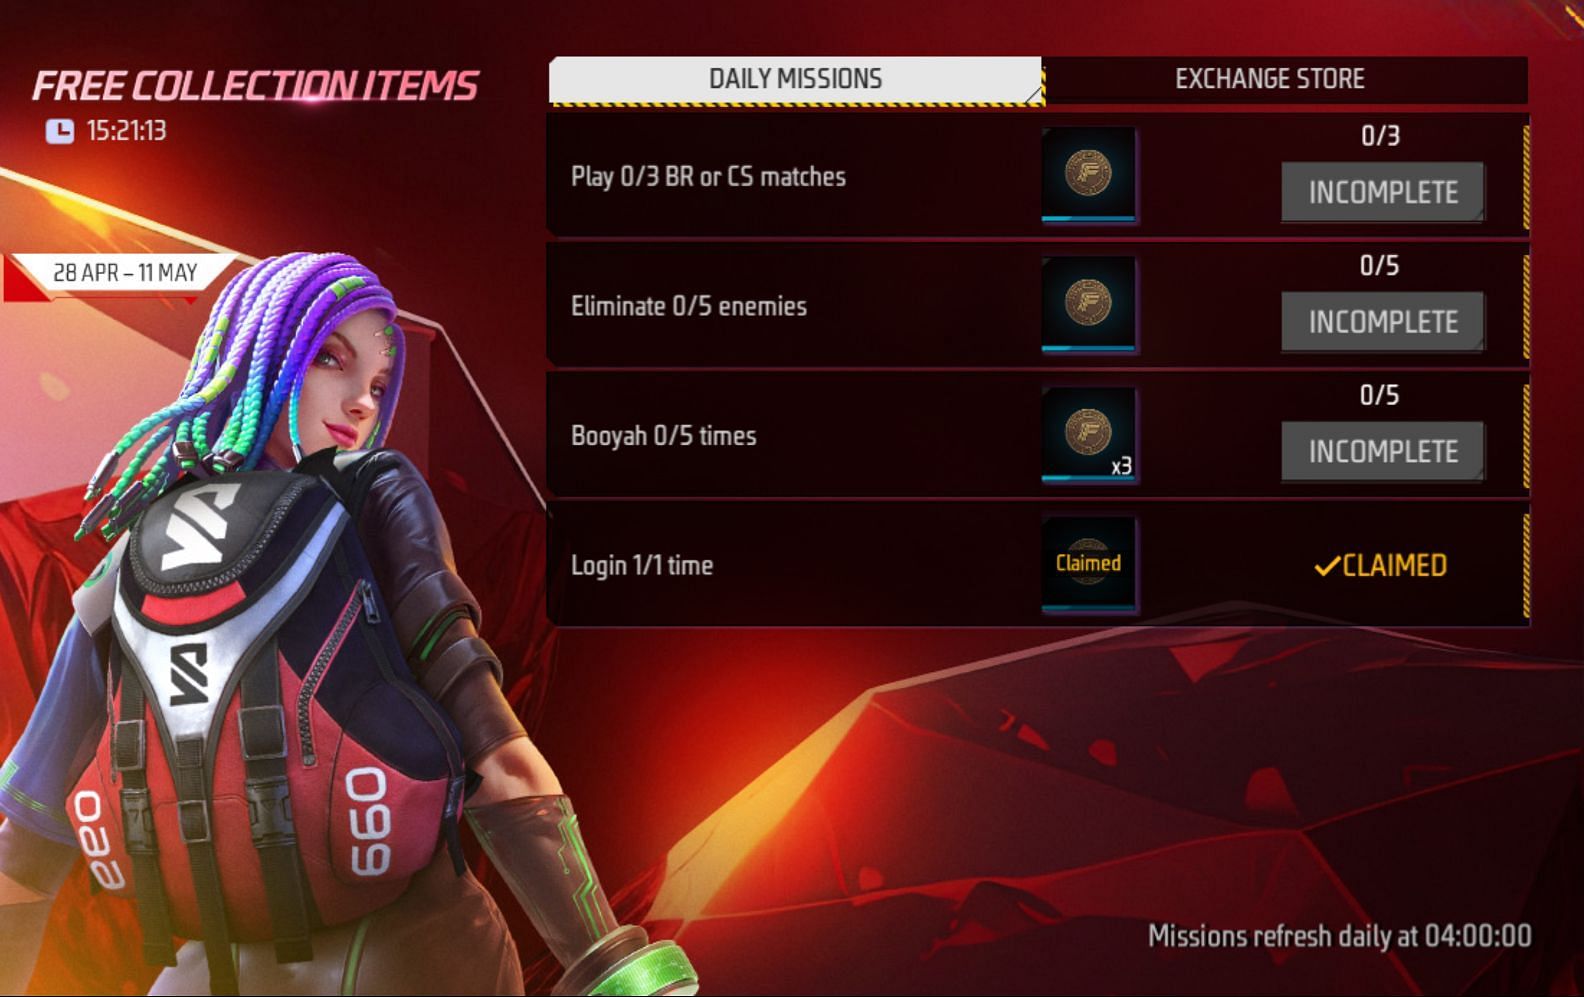 The daily missions for the tokens refresh at 4 am every day (Image via Garena)